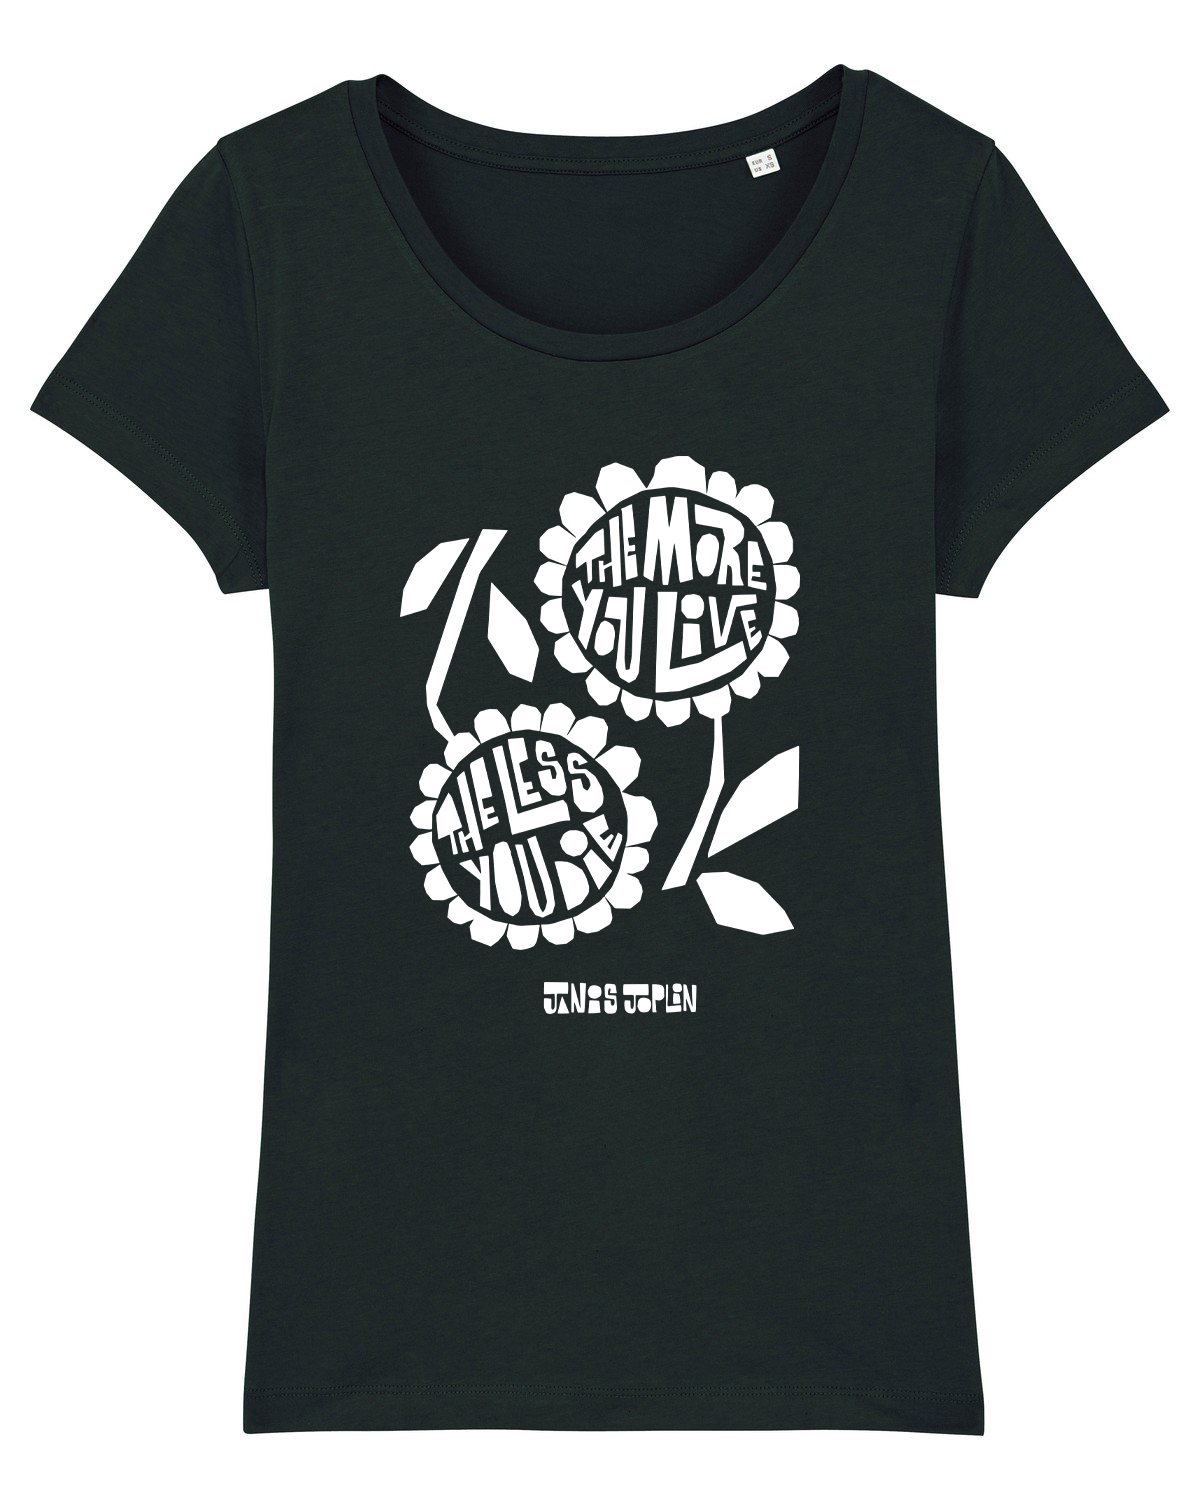 'The More You Live, The Less You Die' Organic Womens T-shirt